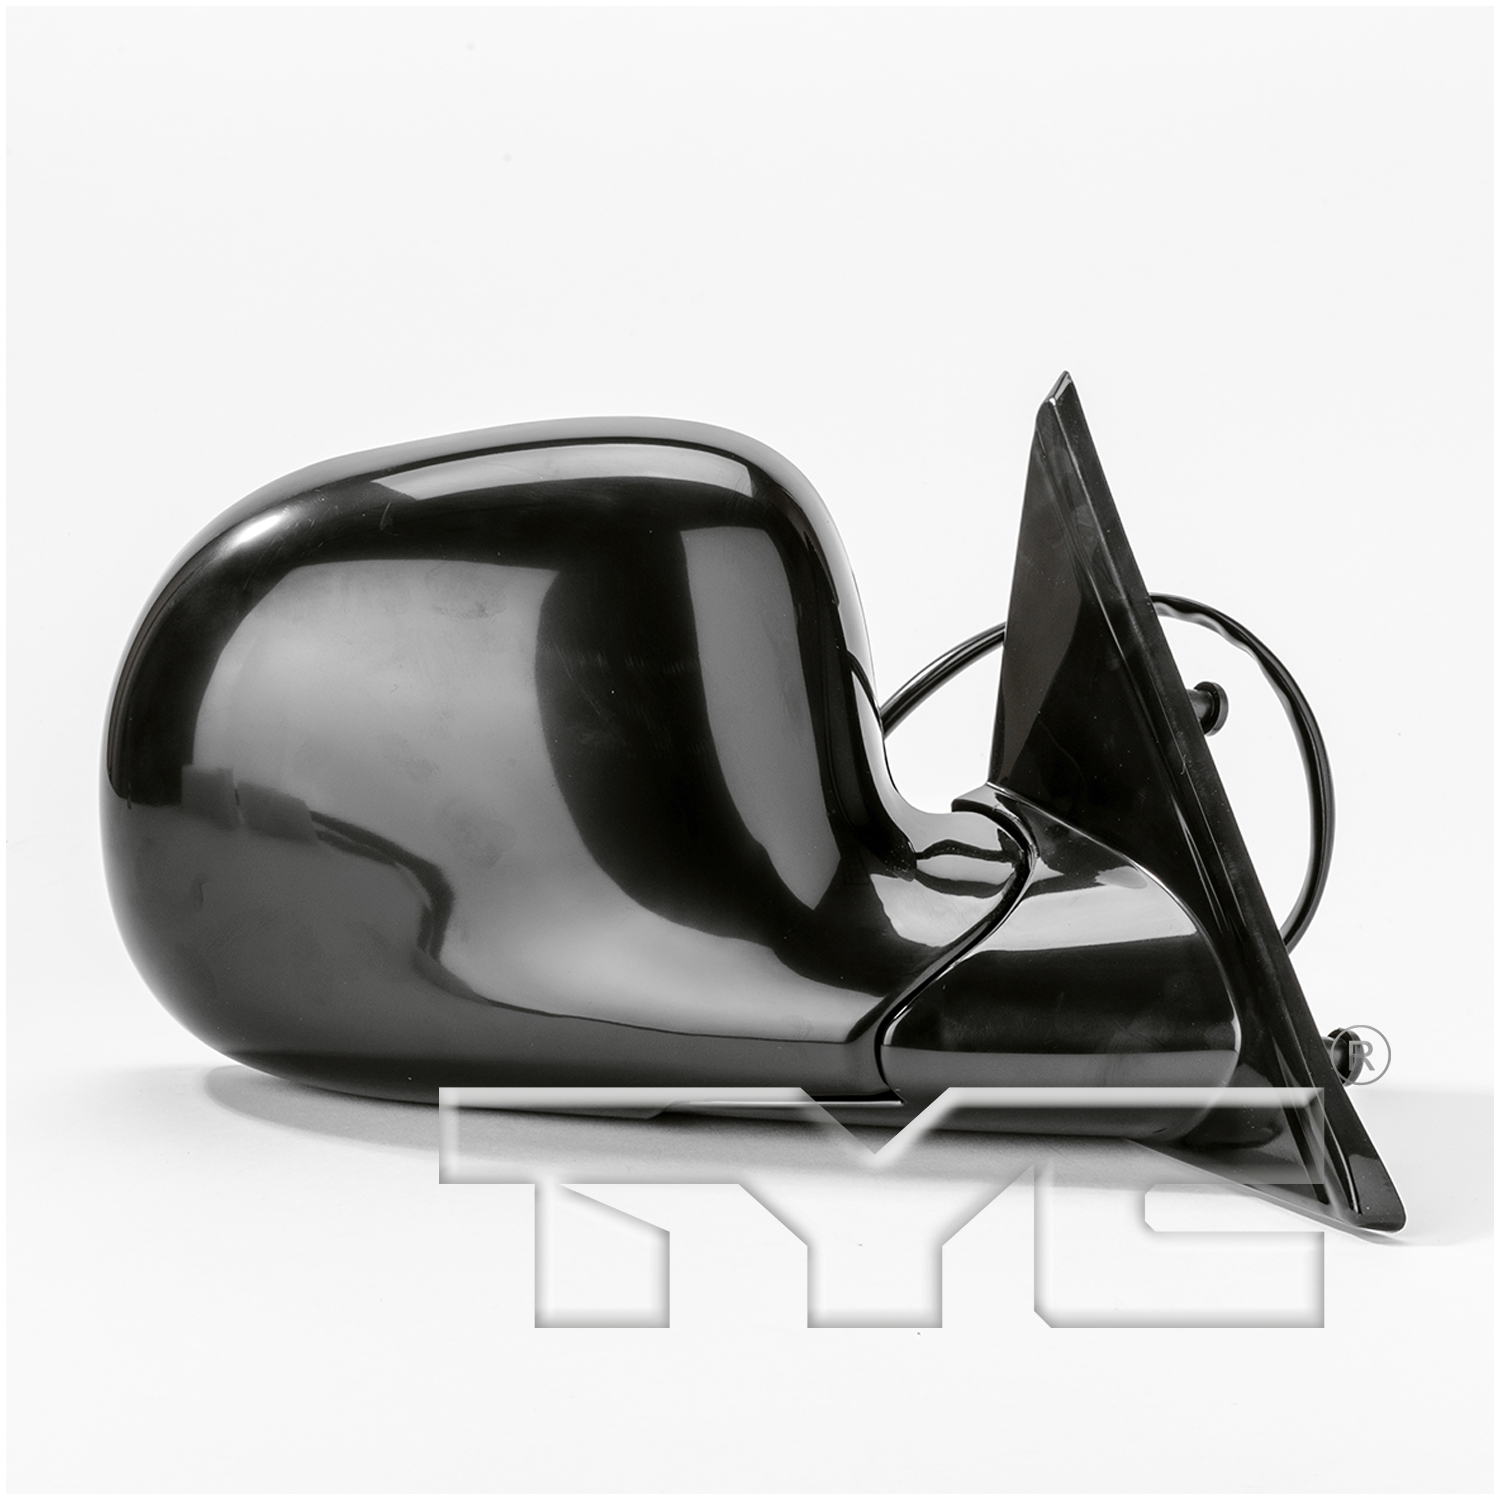 Aftermarket MIRRORS for GMC - JIMMY, JIMMY,98-98,RT Mirror outside rear view